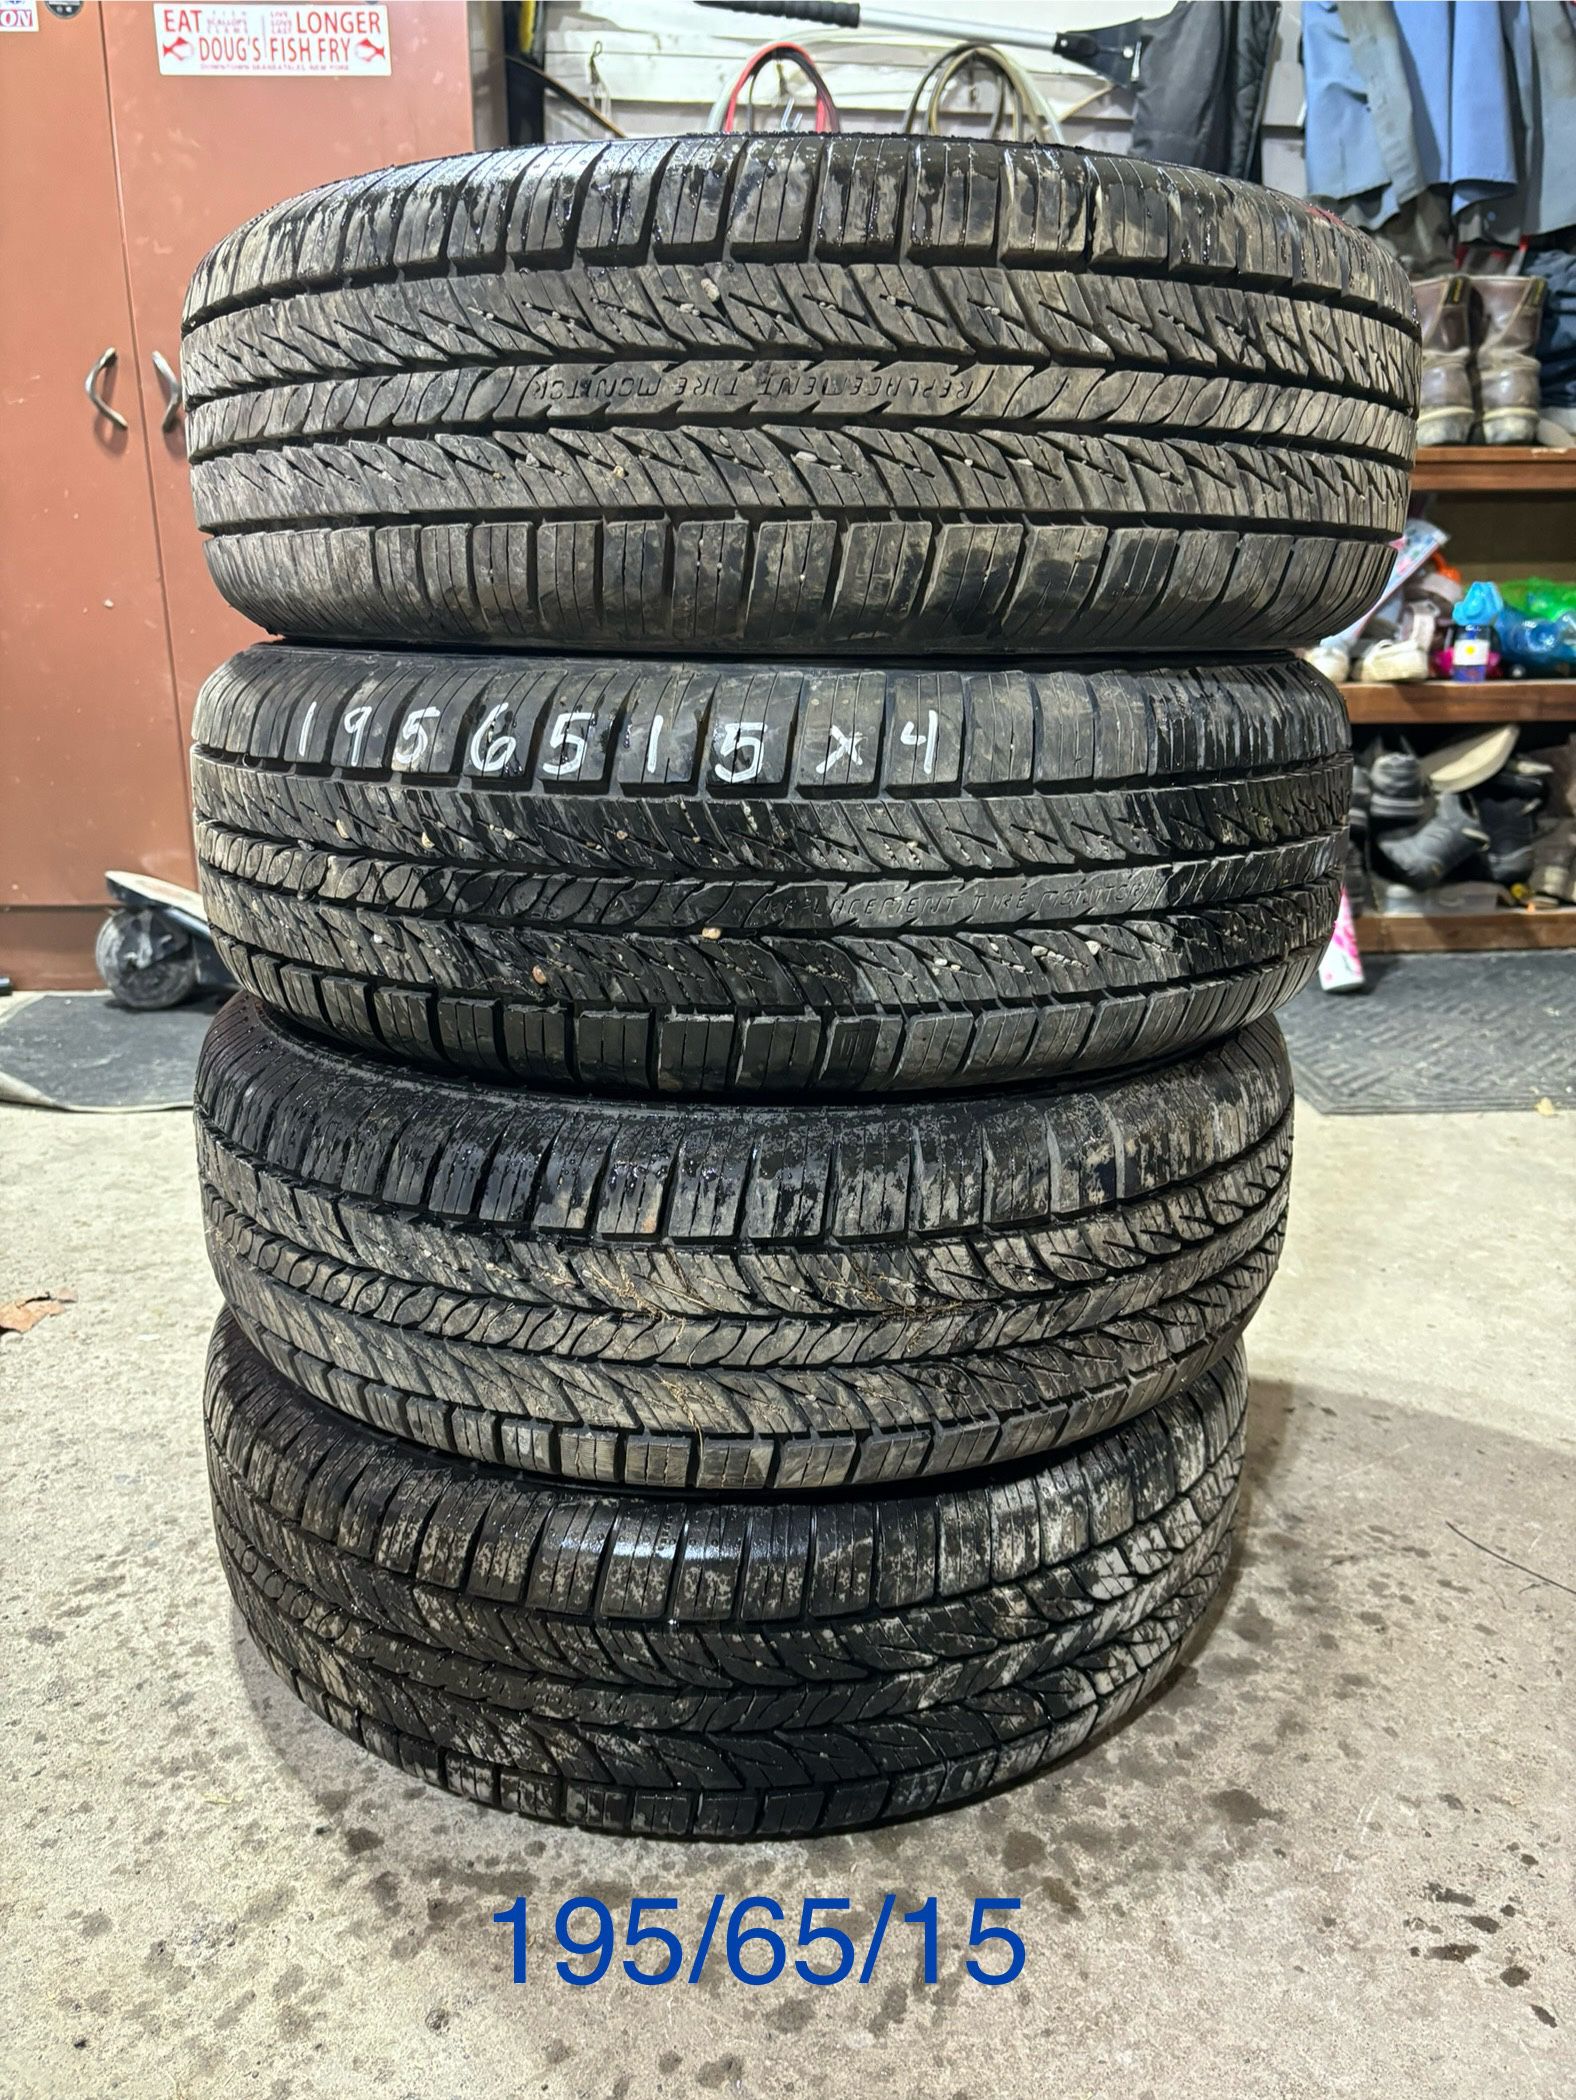 (4) - 195/65/15 General Altimax RT43 Tires 